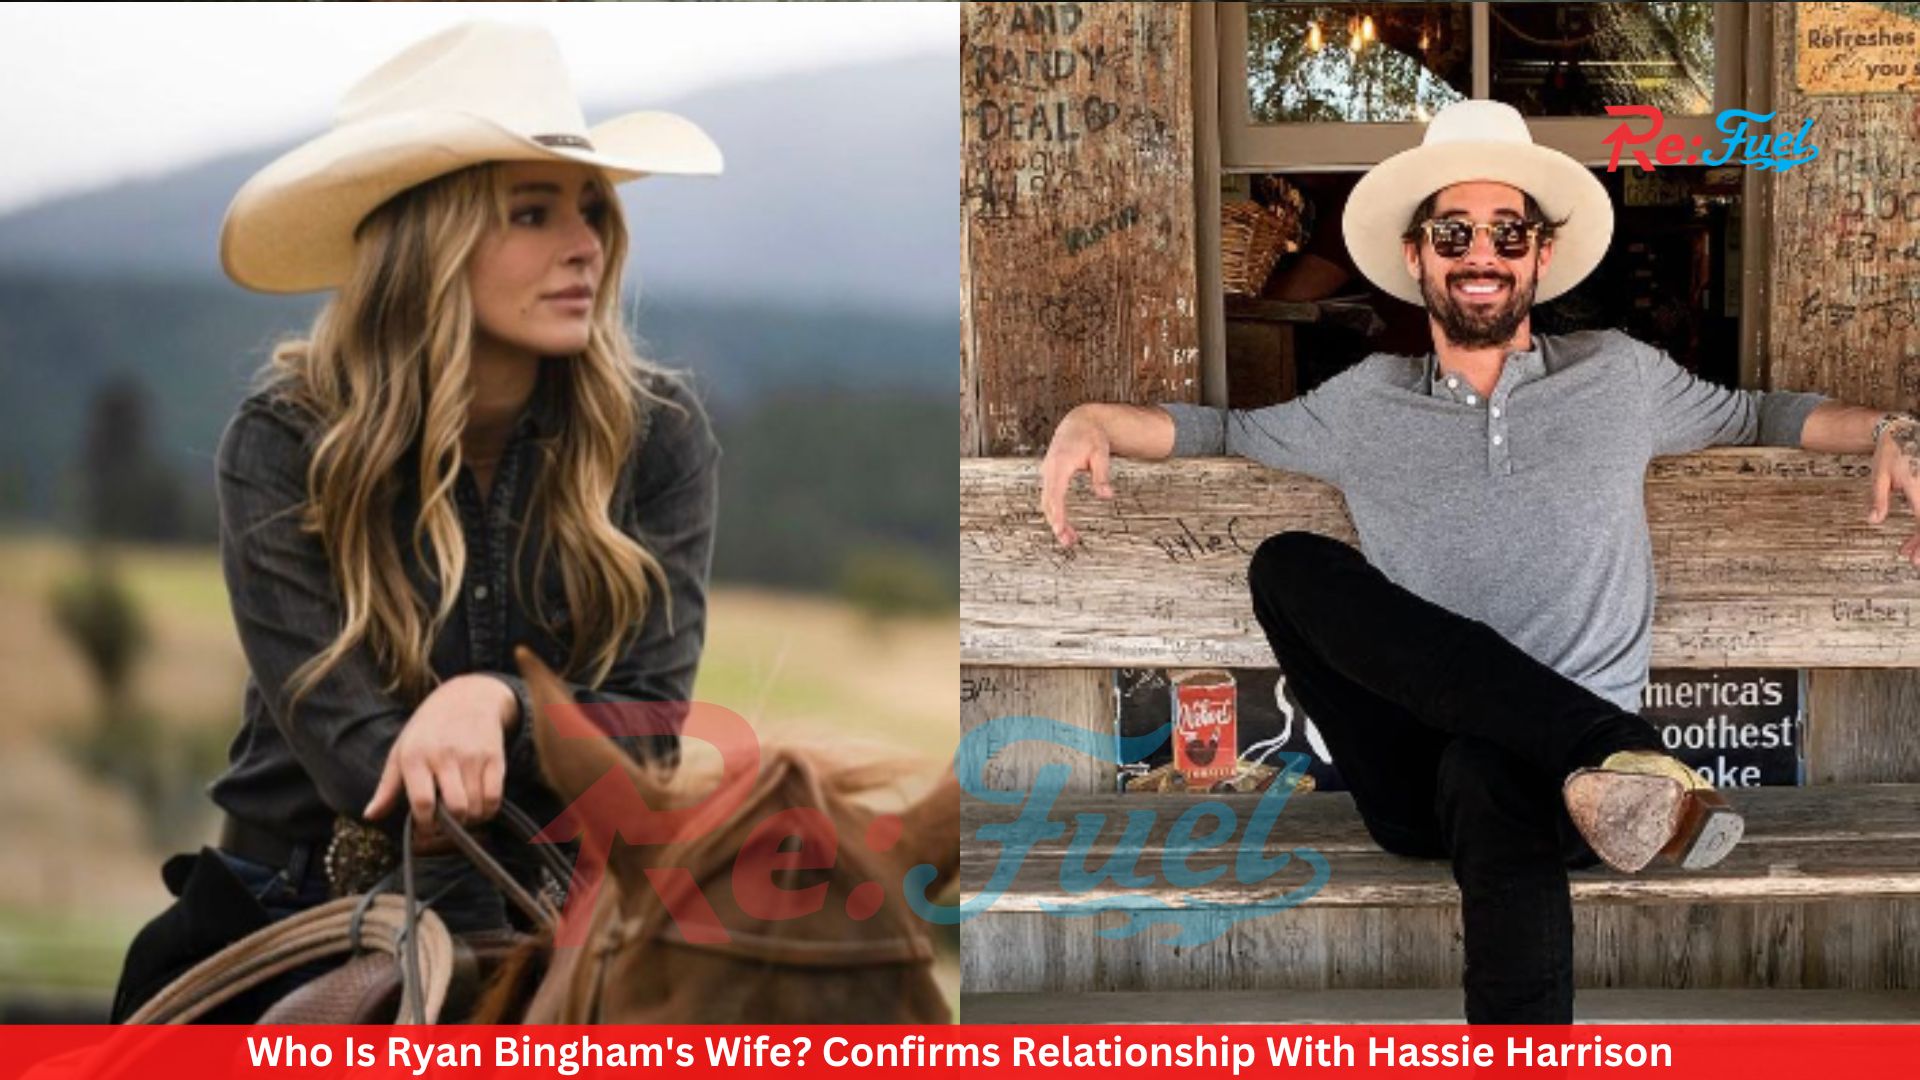 Who Is Ryan Bingham's Wife? Confirms Relationship With Hassie Harrison